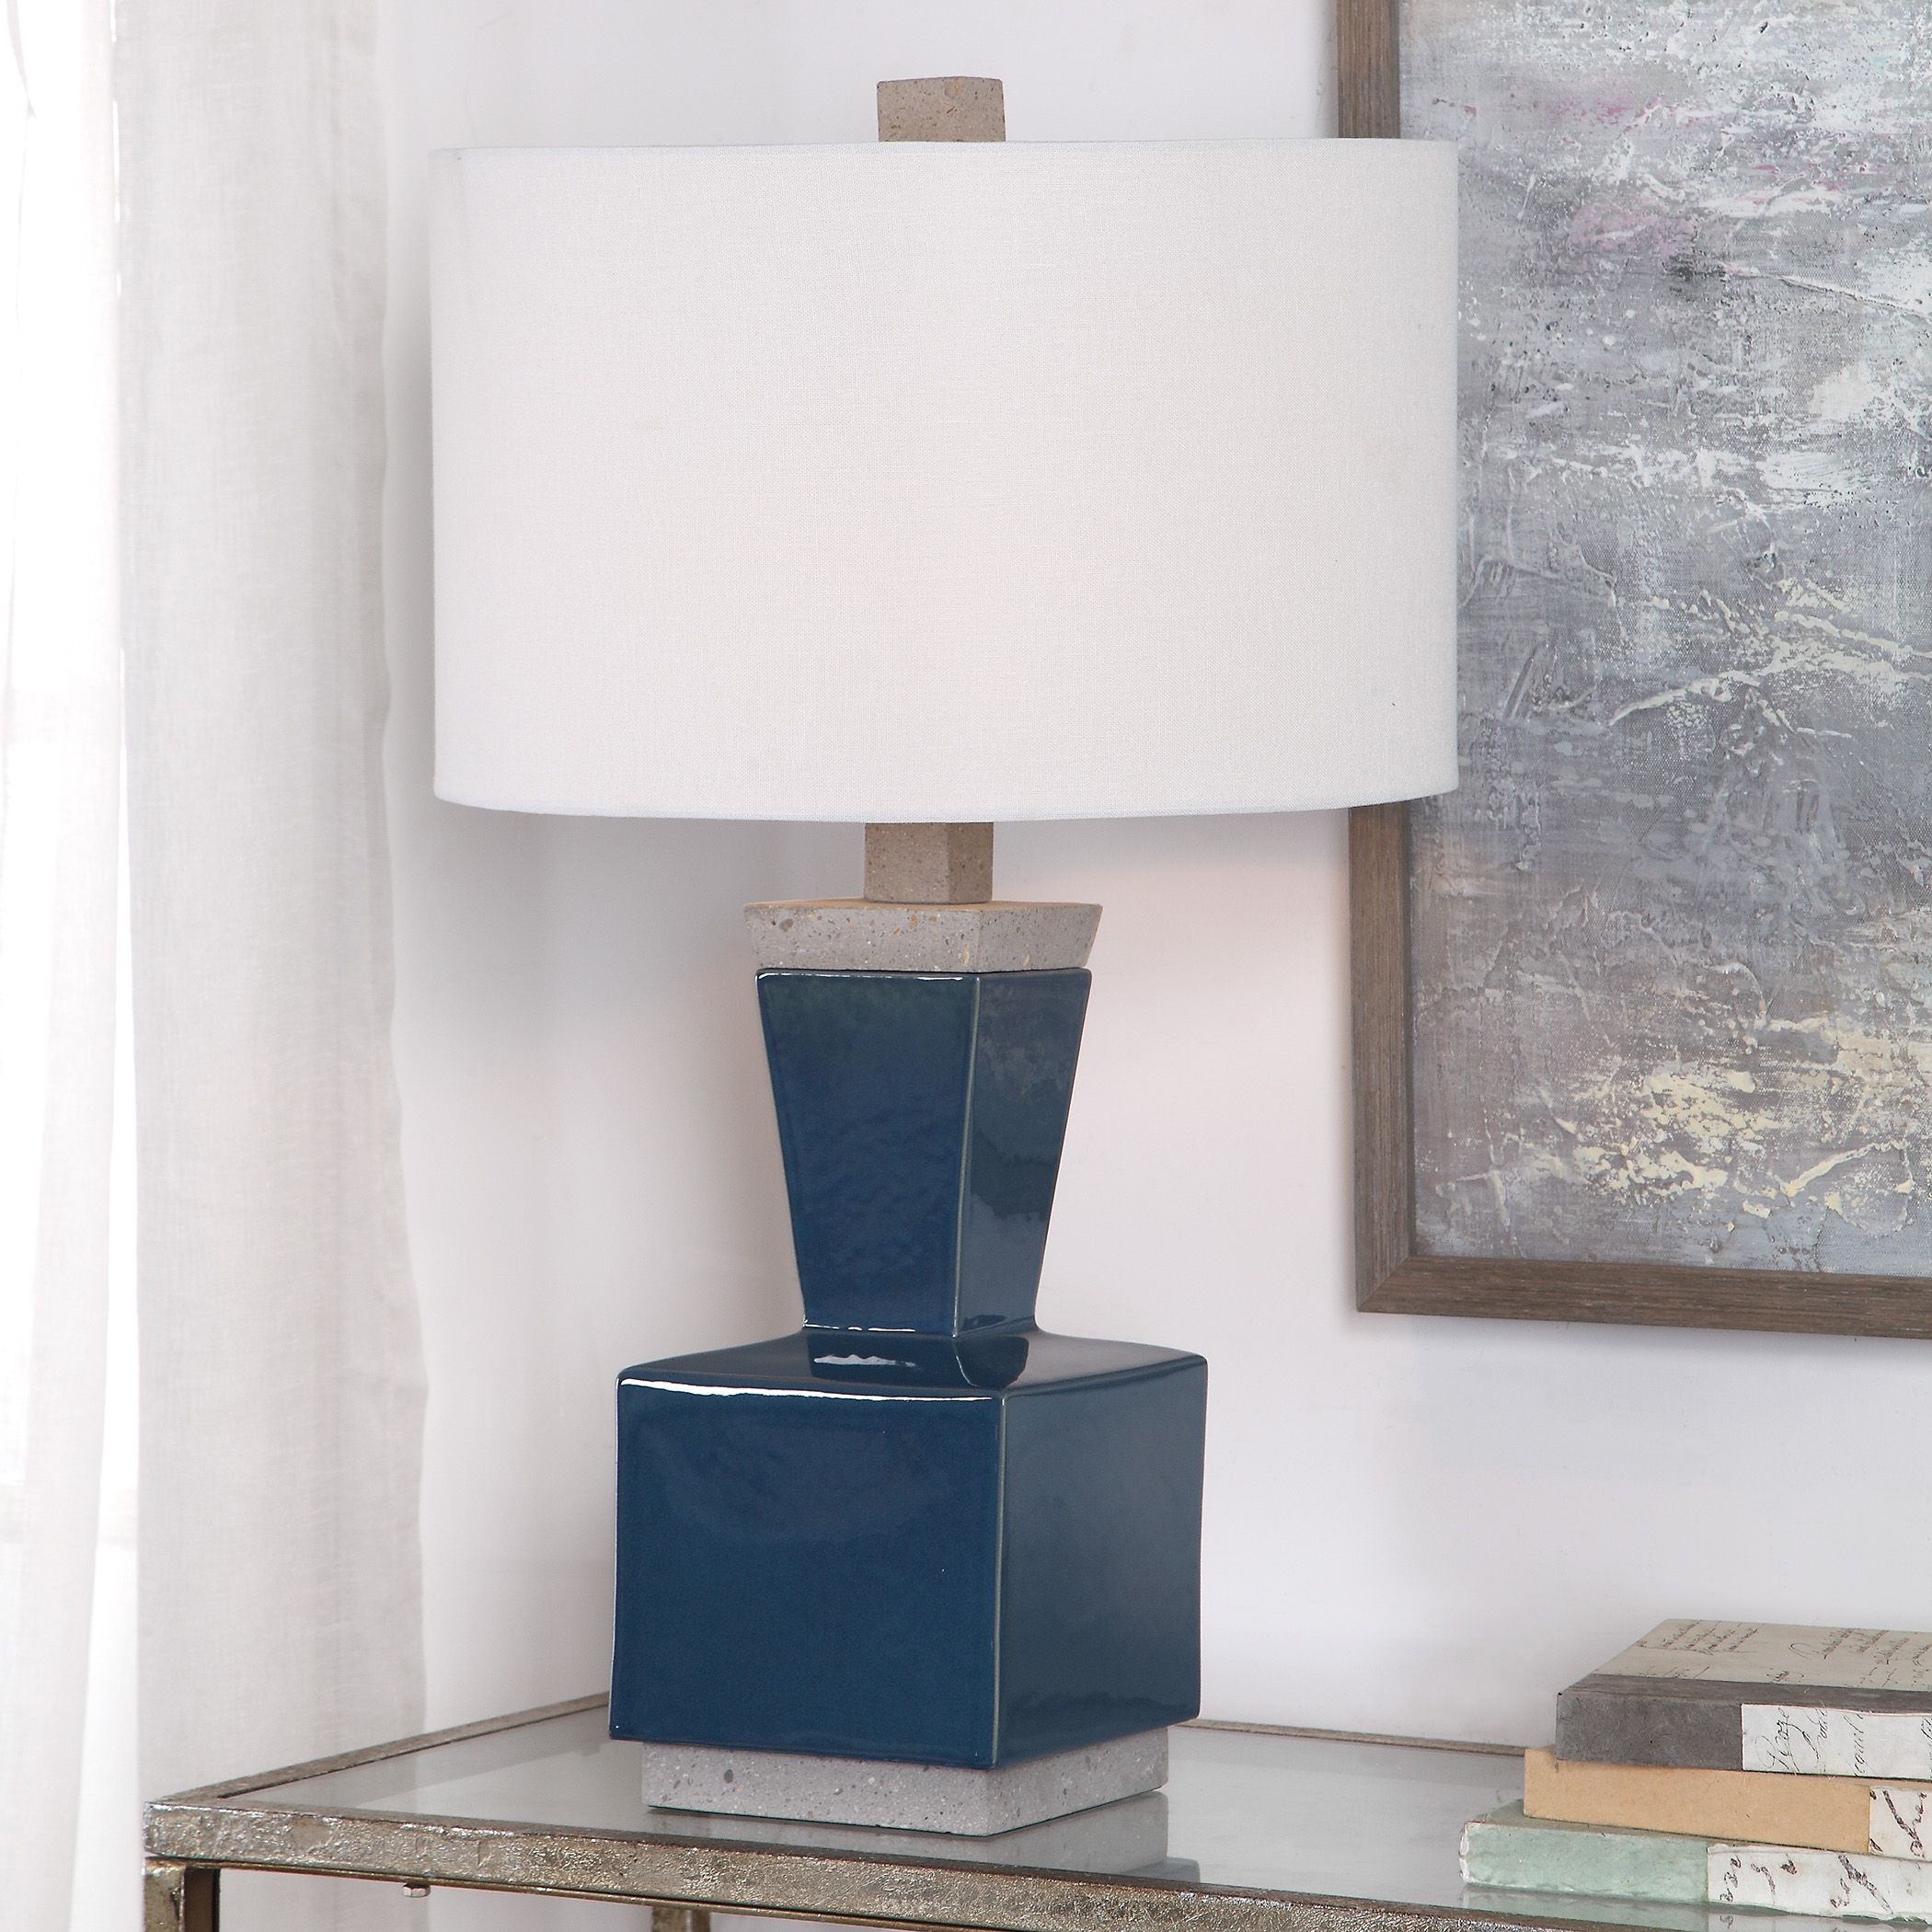 Details About Modern Industrial Blue Ceramic Table Lamp Living Room Bedroom Dining Lighting in sizing 2100 X 2100